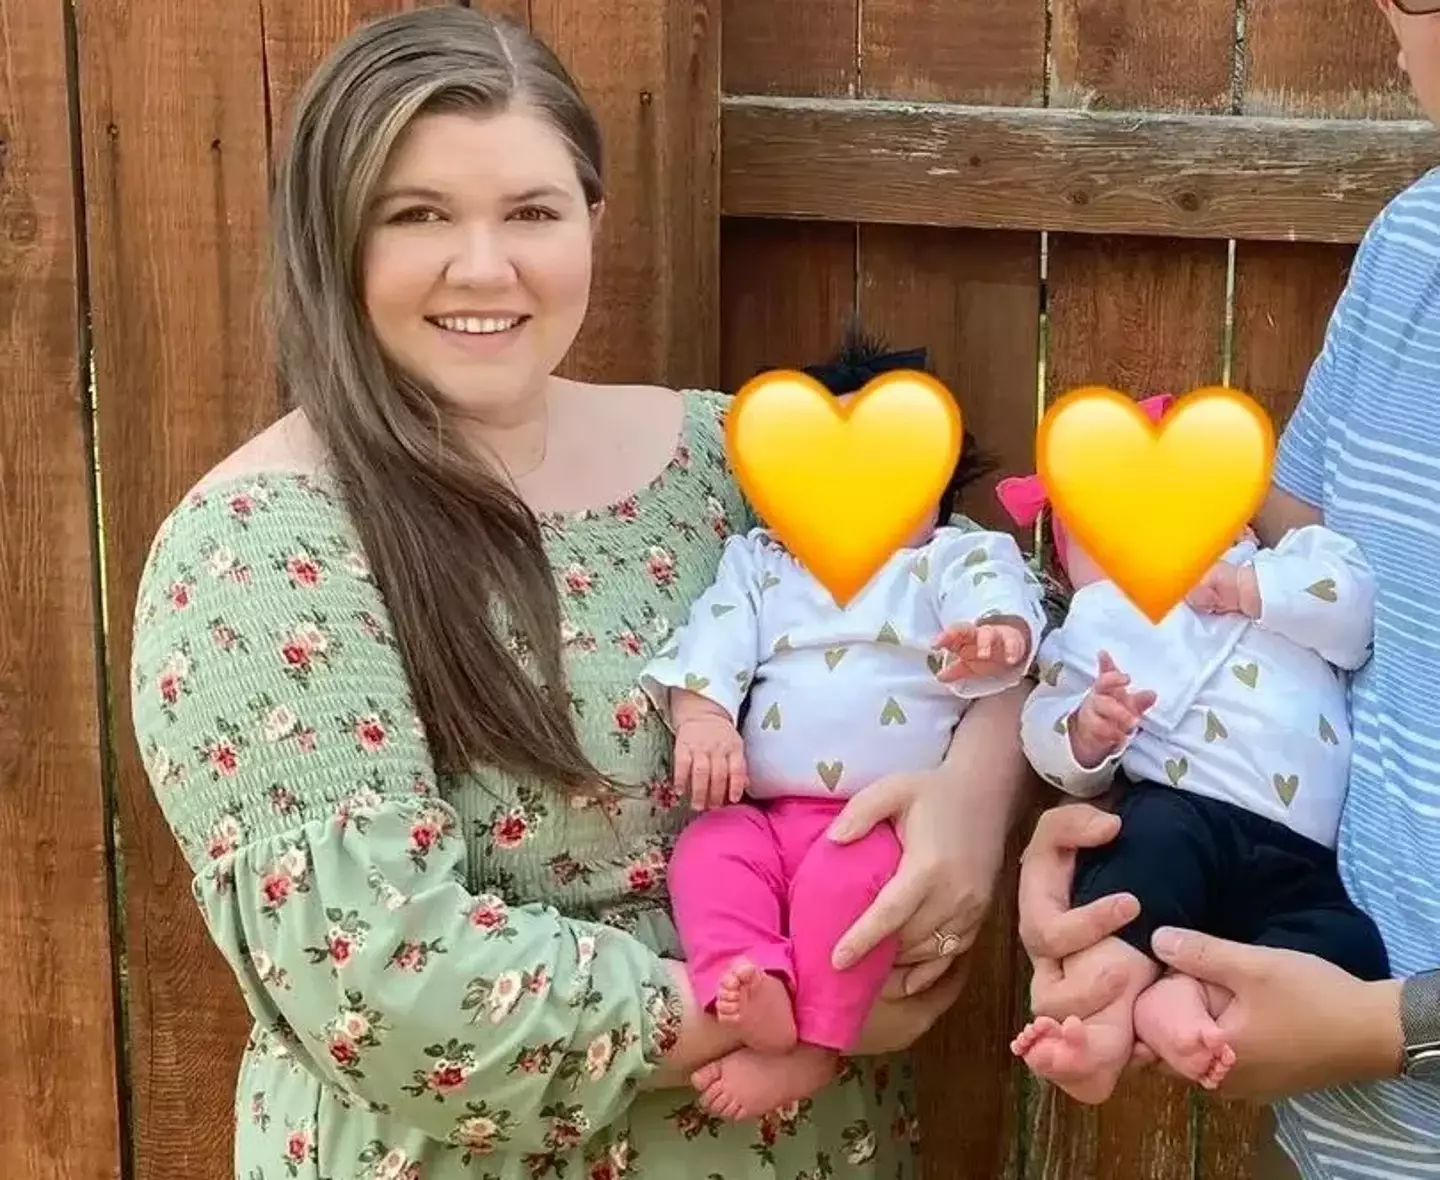 Idaho mum-of-two left horrified after finding out her husband and mum were having an affair.